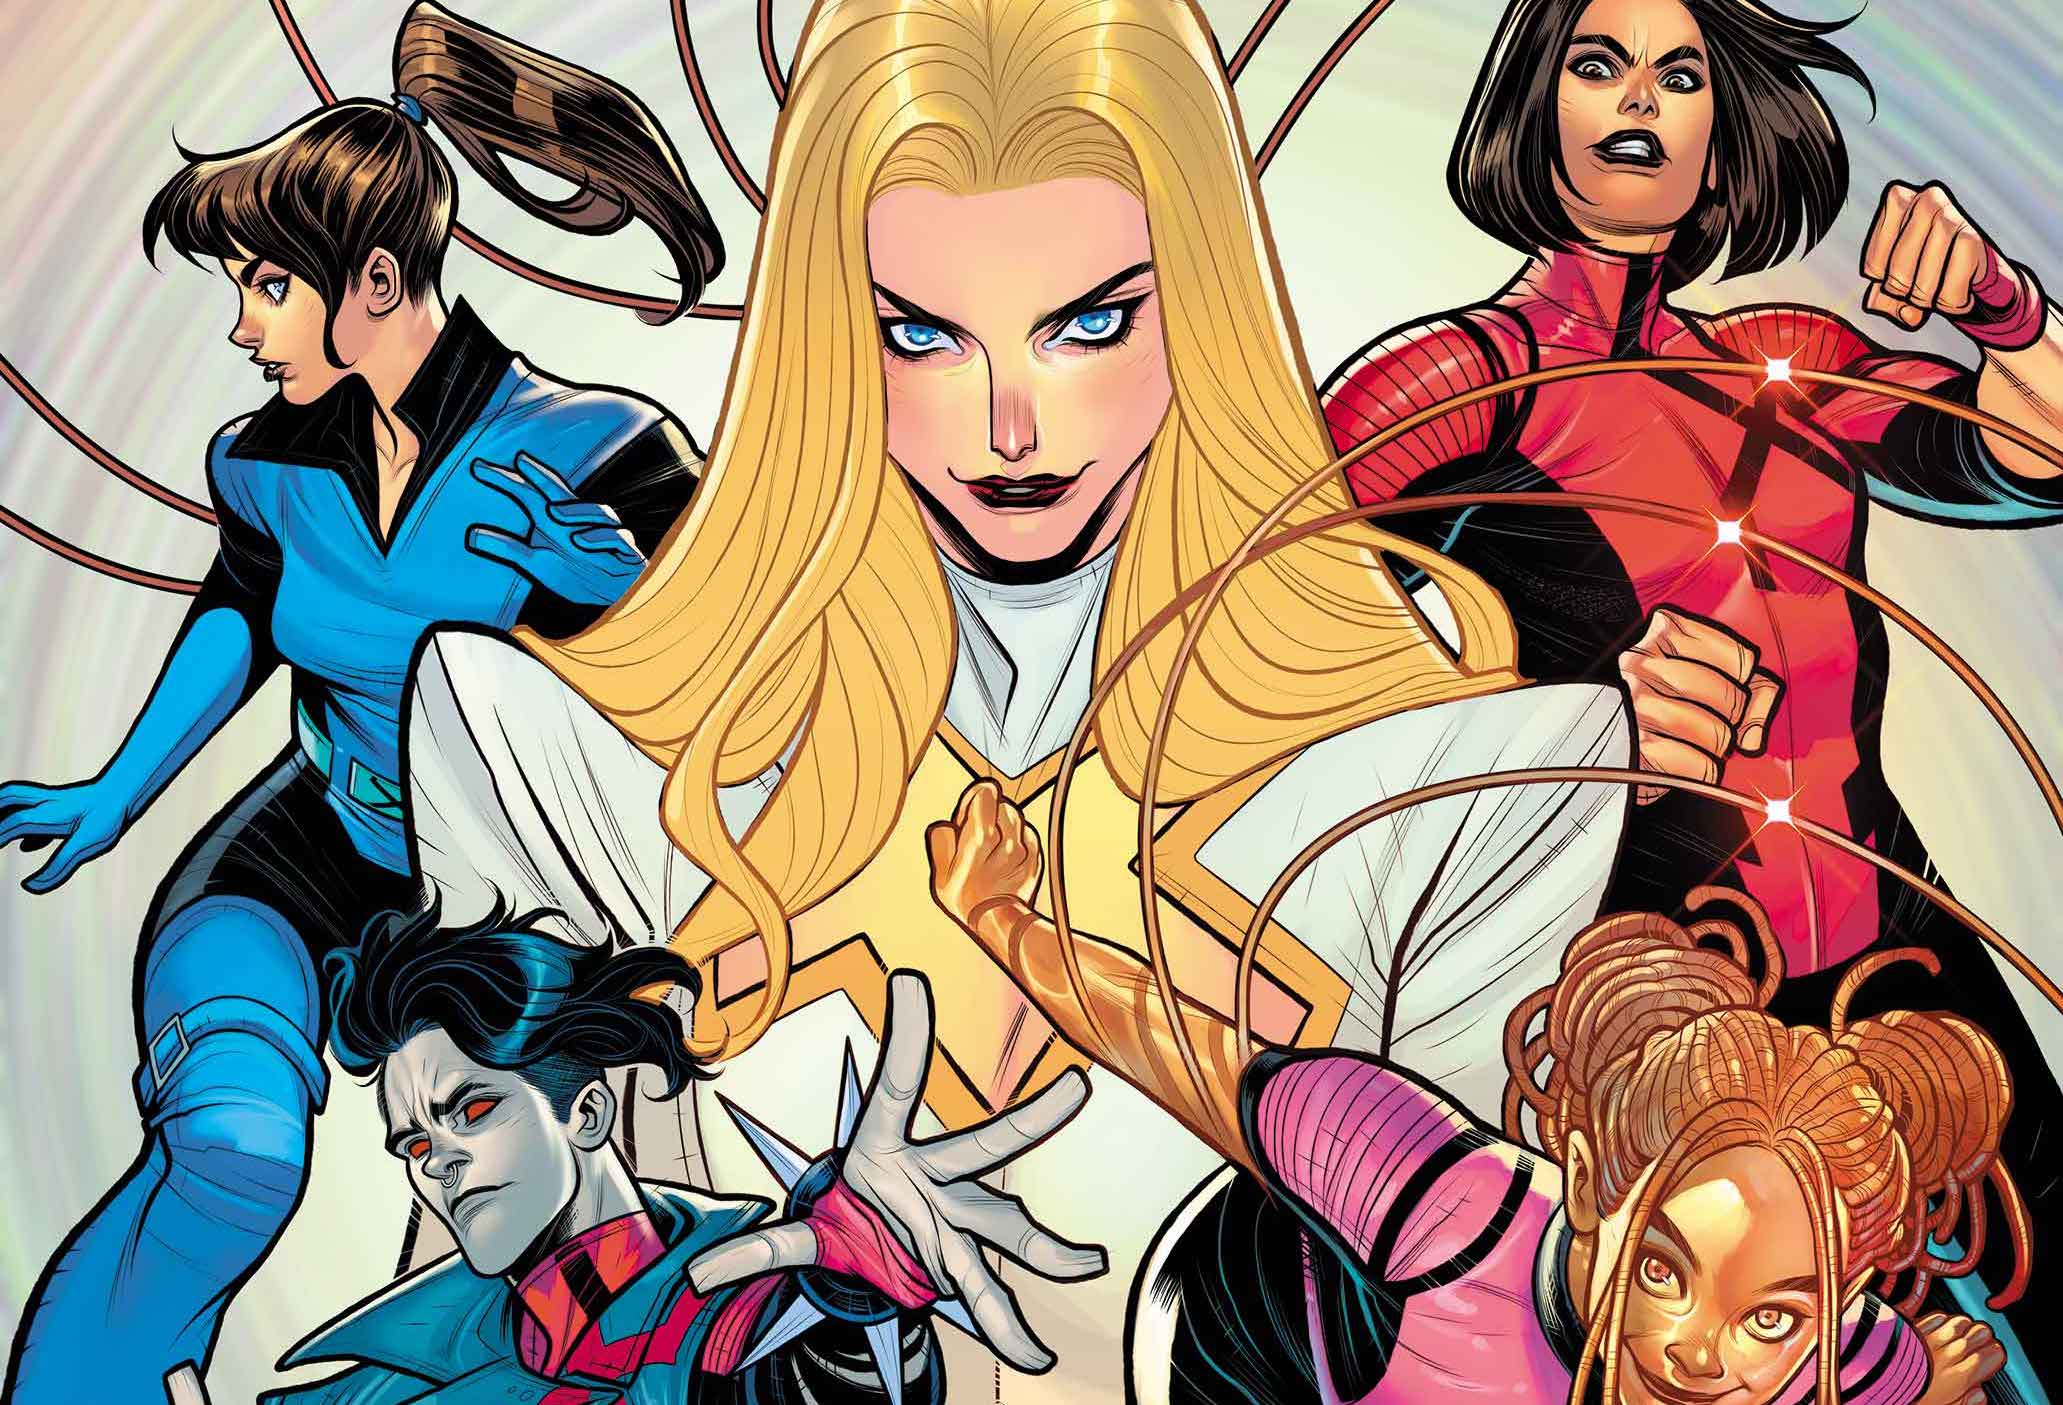 Check out new 'Exceptional X-Men' #1 variant covers